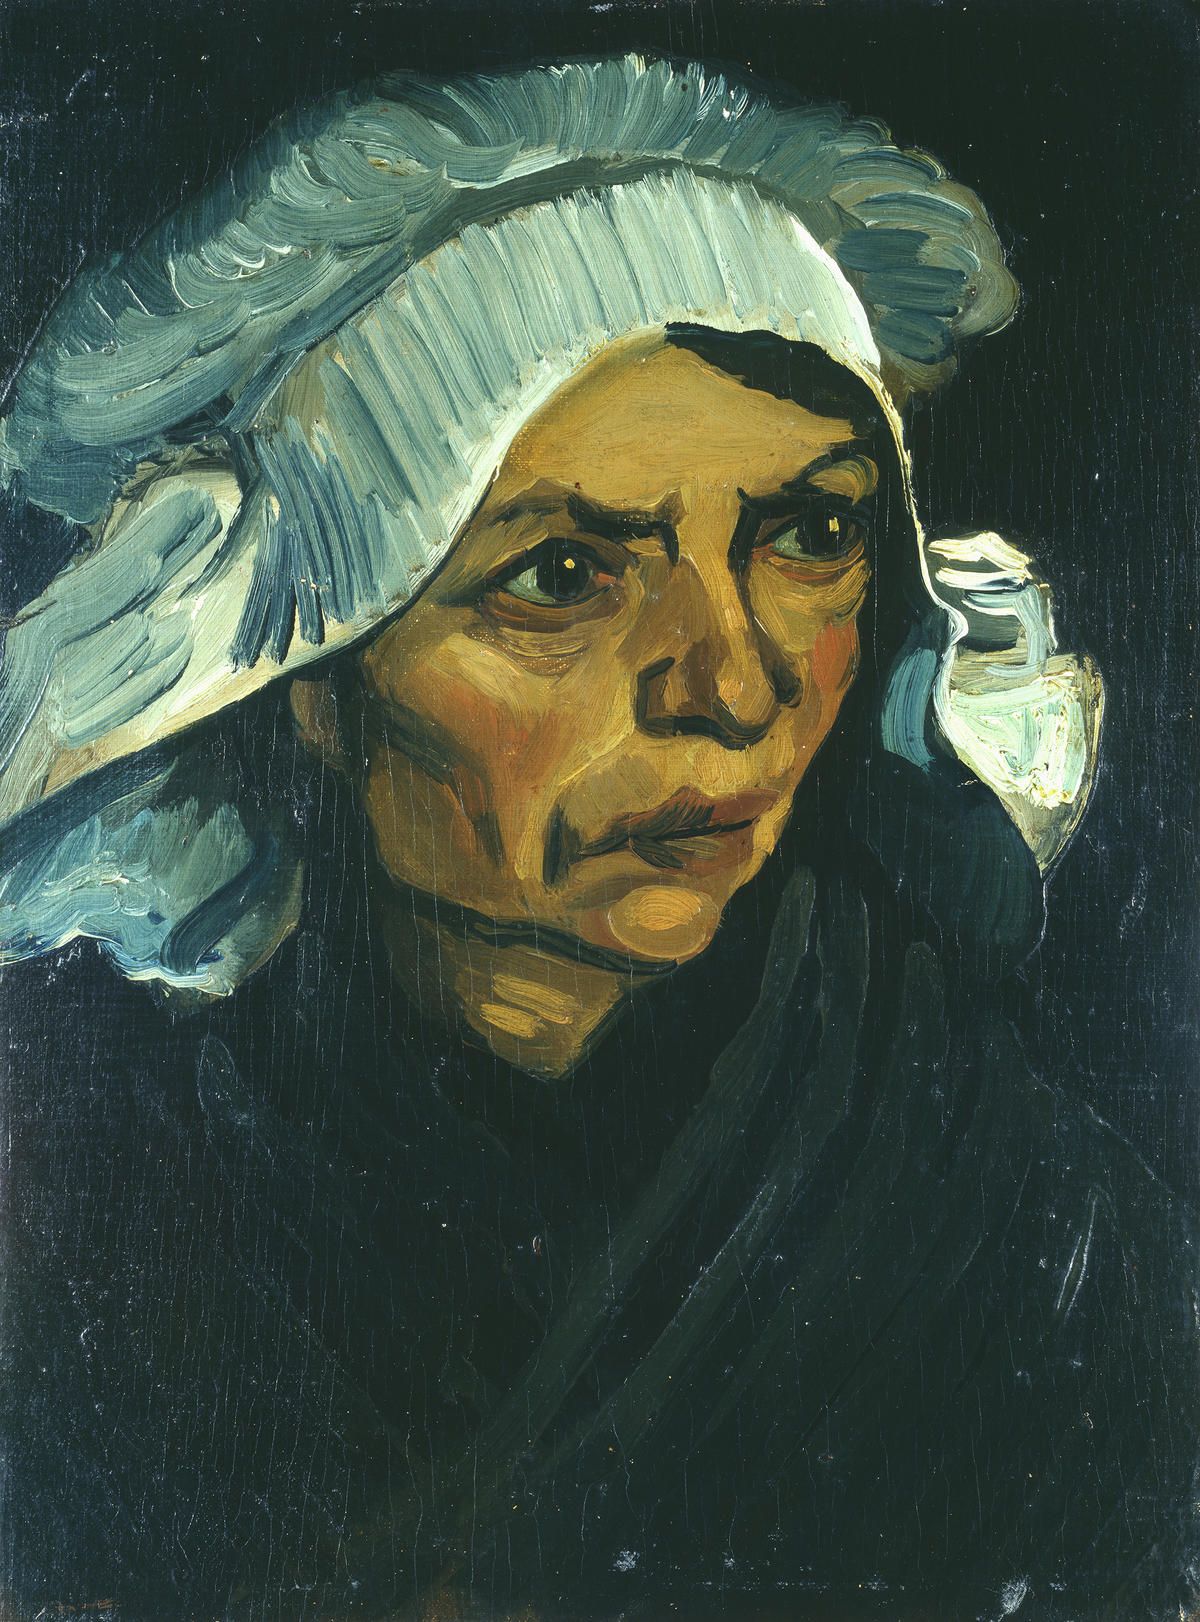 Vincent van Gogh’s Head of a Peasant Woman (1885) in the Bührle Collection was owned by a Jewish collector in the Nazi era 